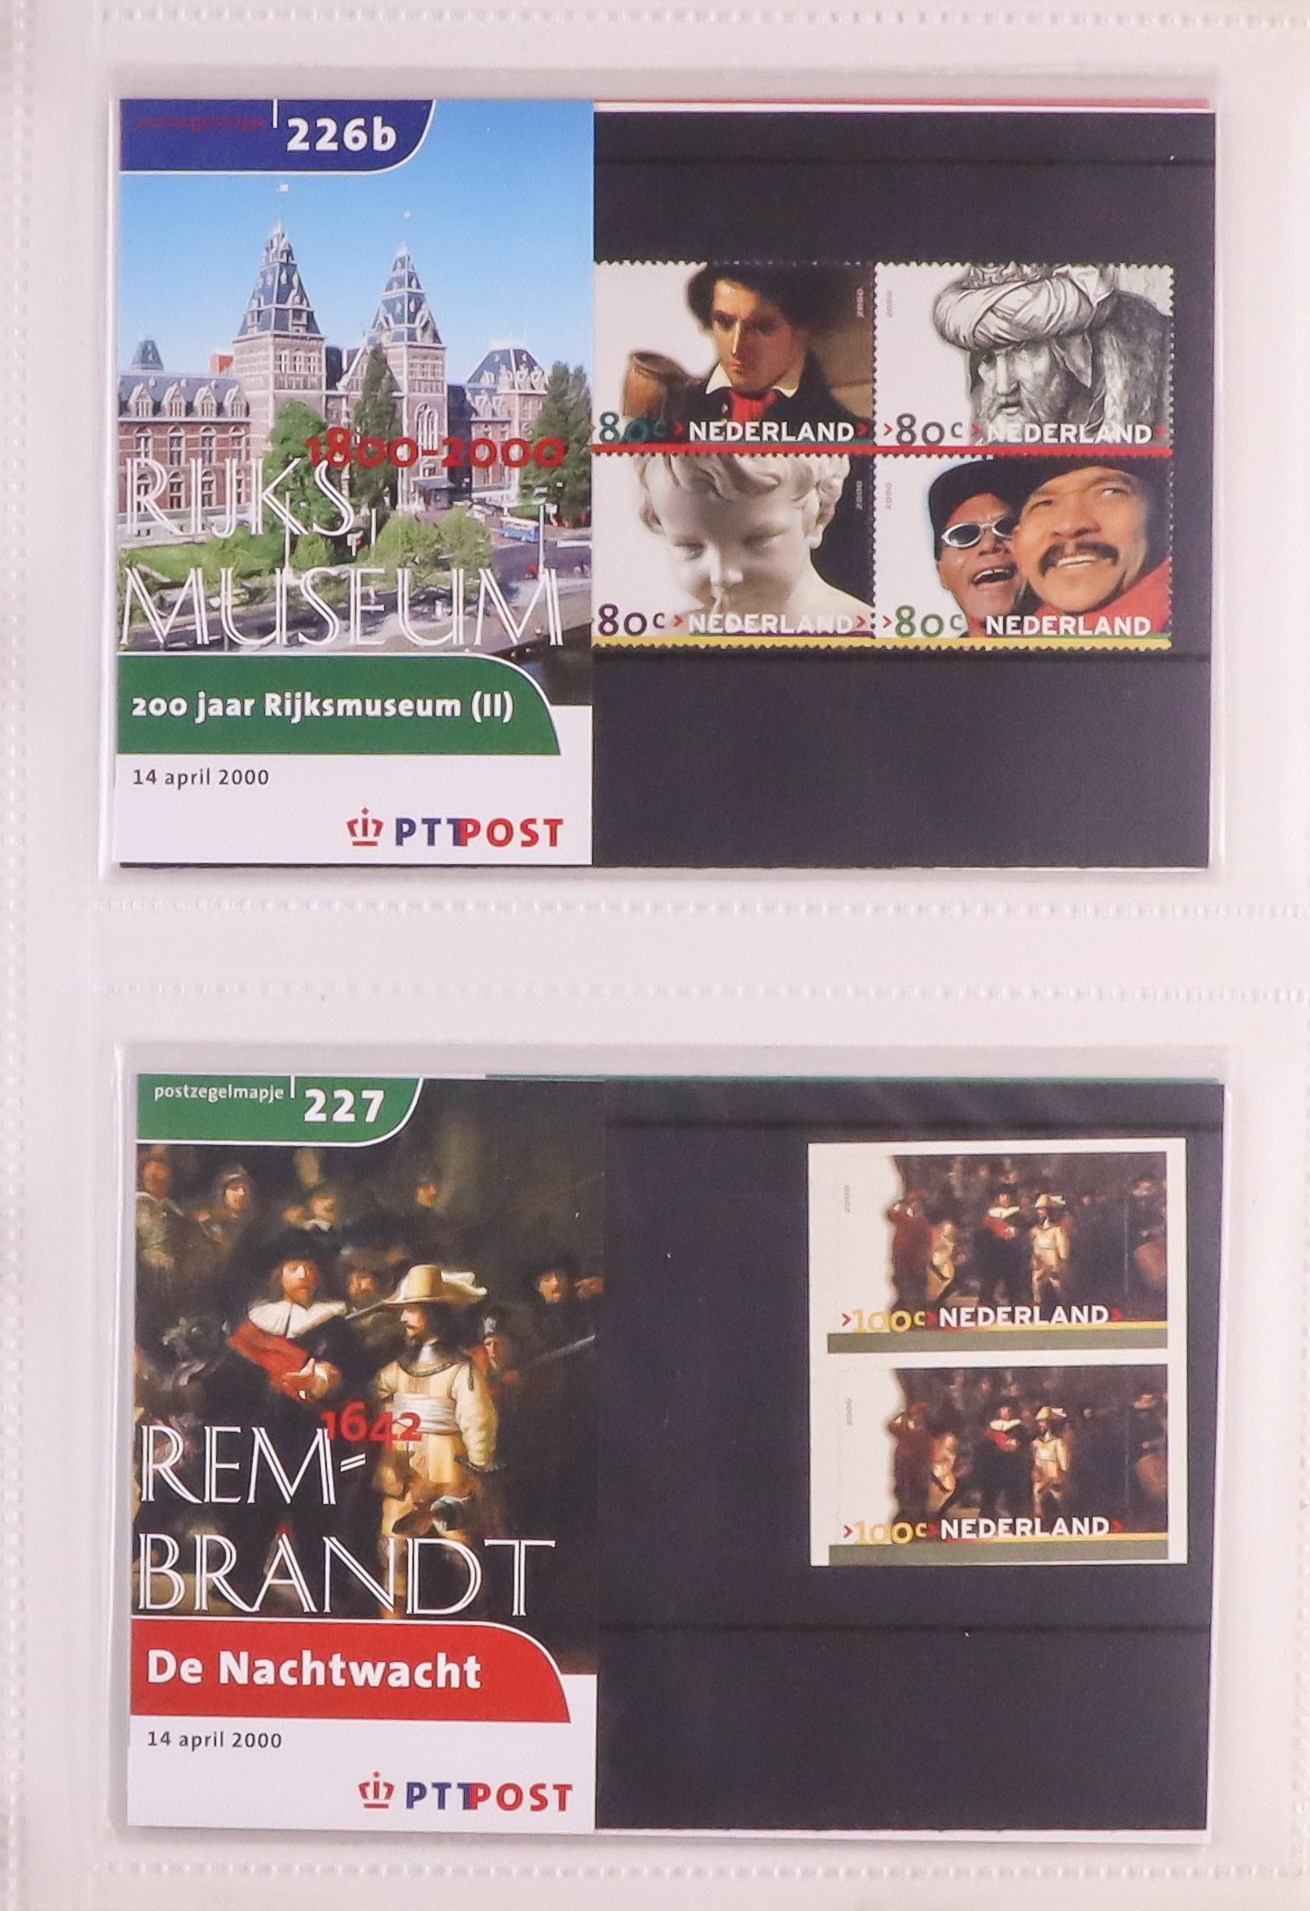 NETHERLANDS 1982-2001 PRESENTATION PACKS Complete run in five special albums, numbers 1 to 246b, - Image 3 of 9